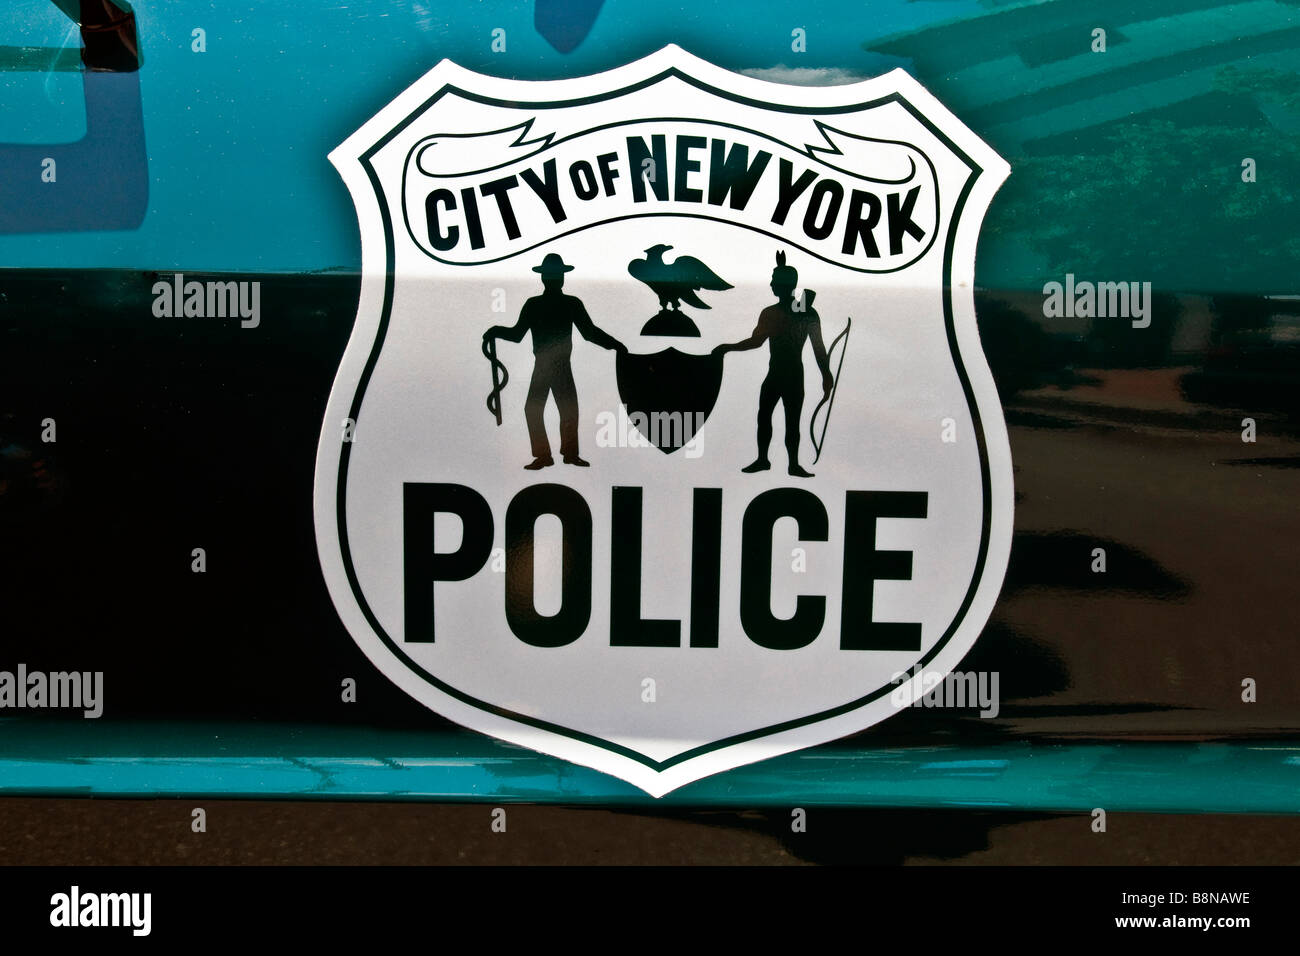 Close-up of emblem on the door of a City of New York Police vehicle at The new York city police museum Stock Photo